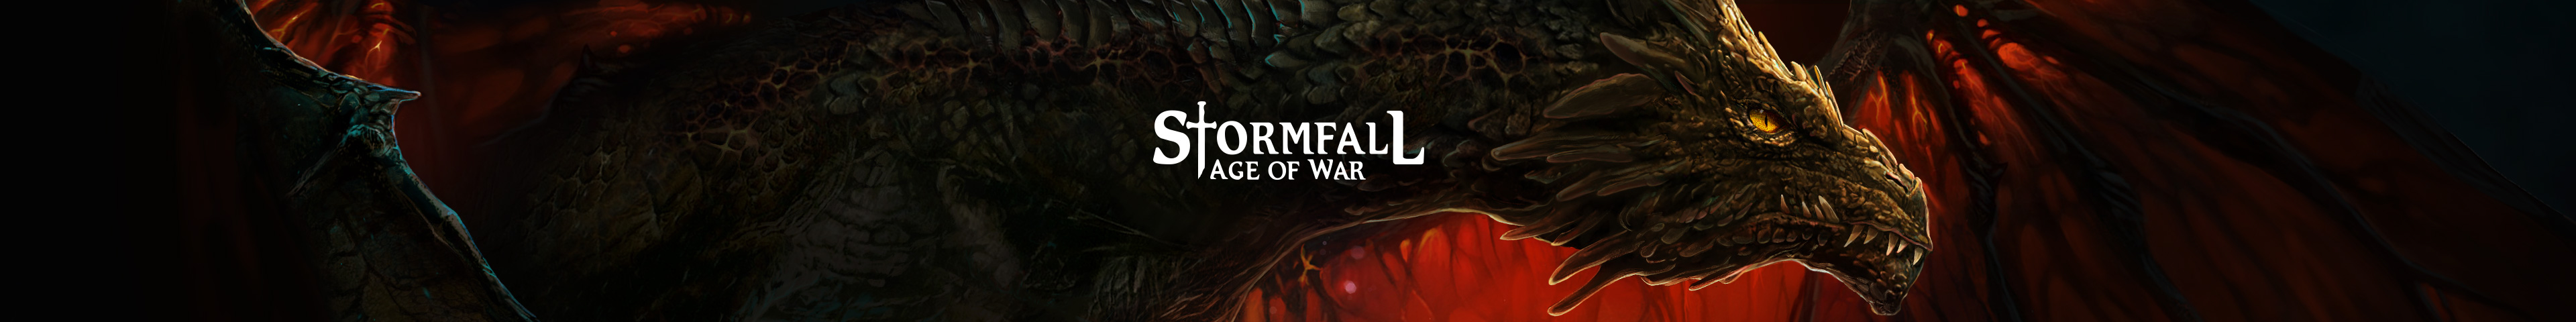 What's better than spending time with your League in Stormfall?